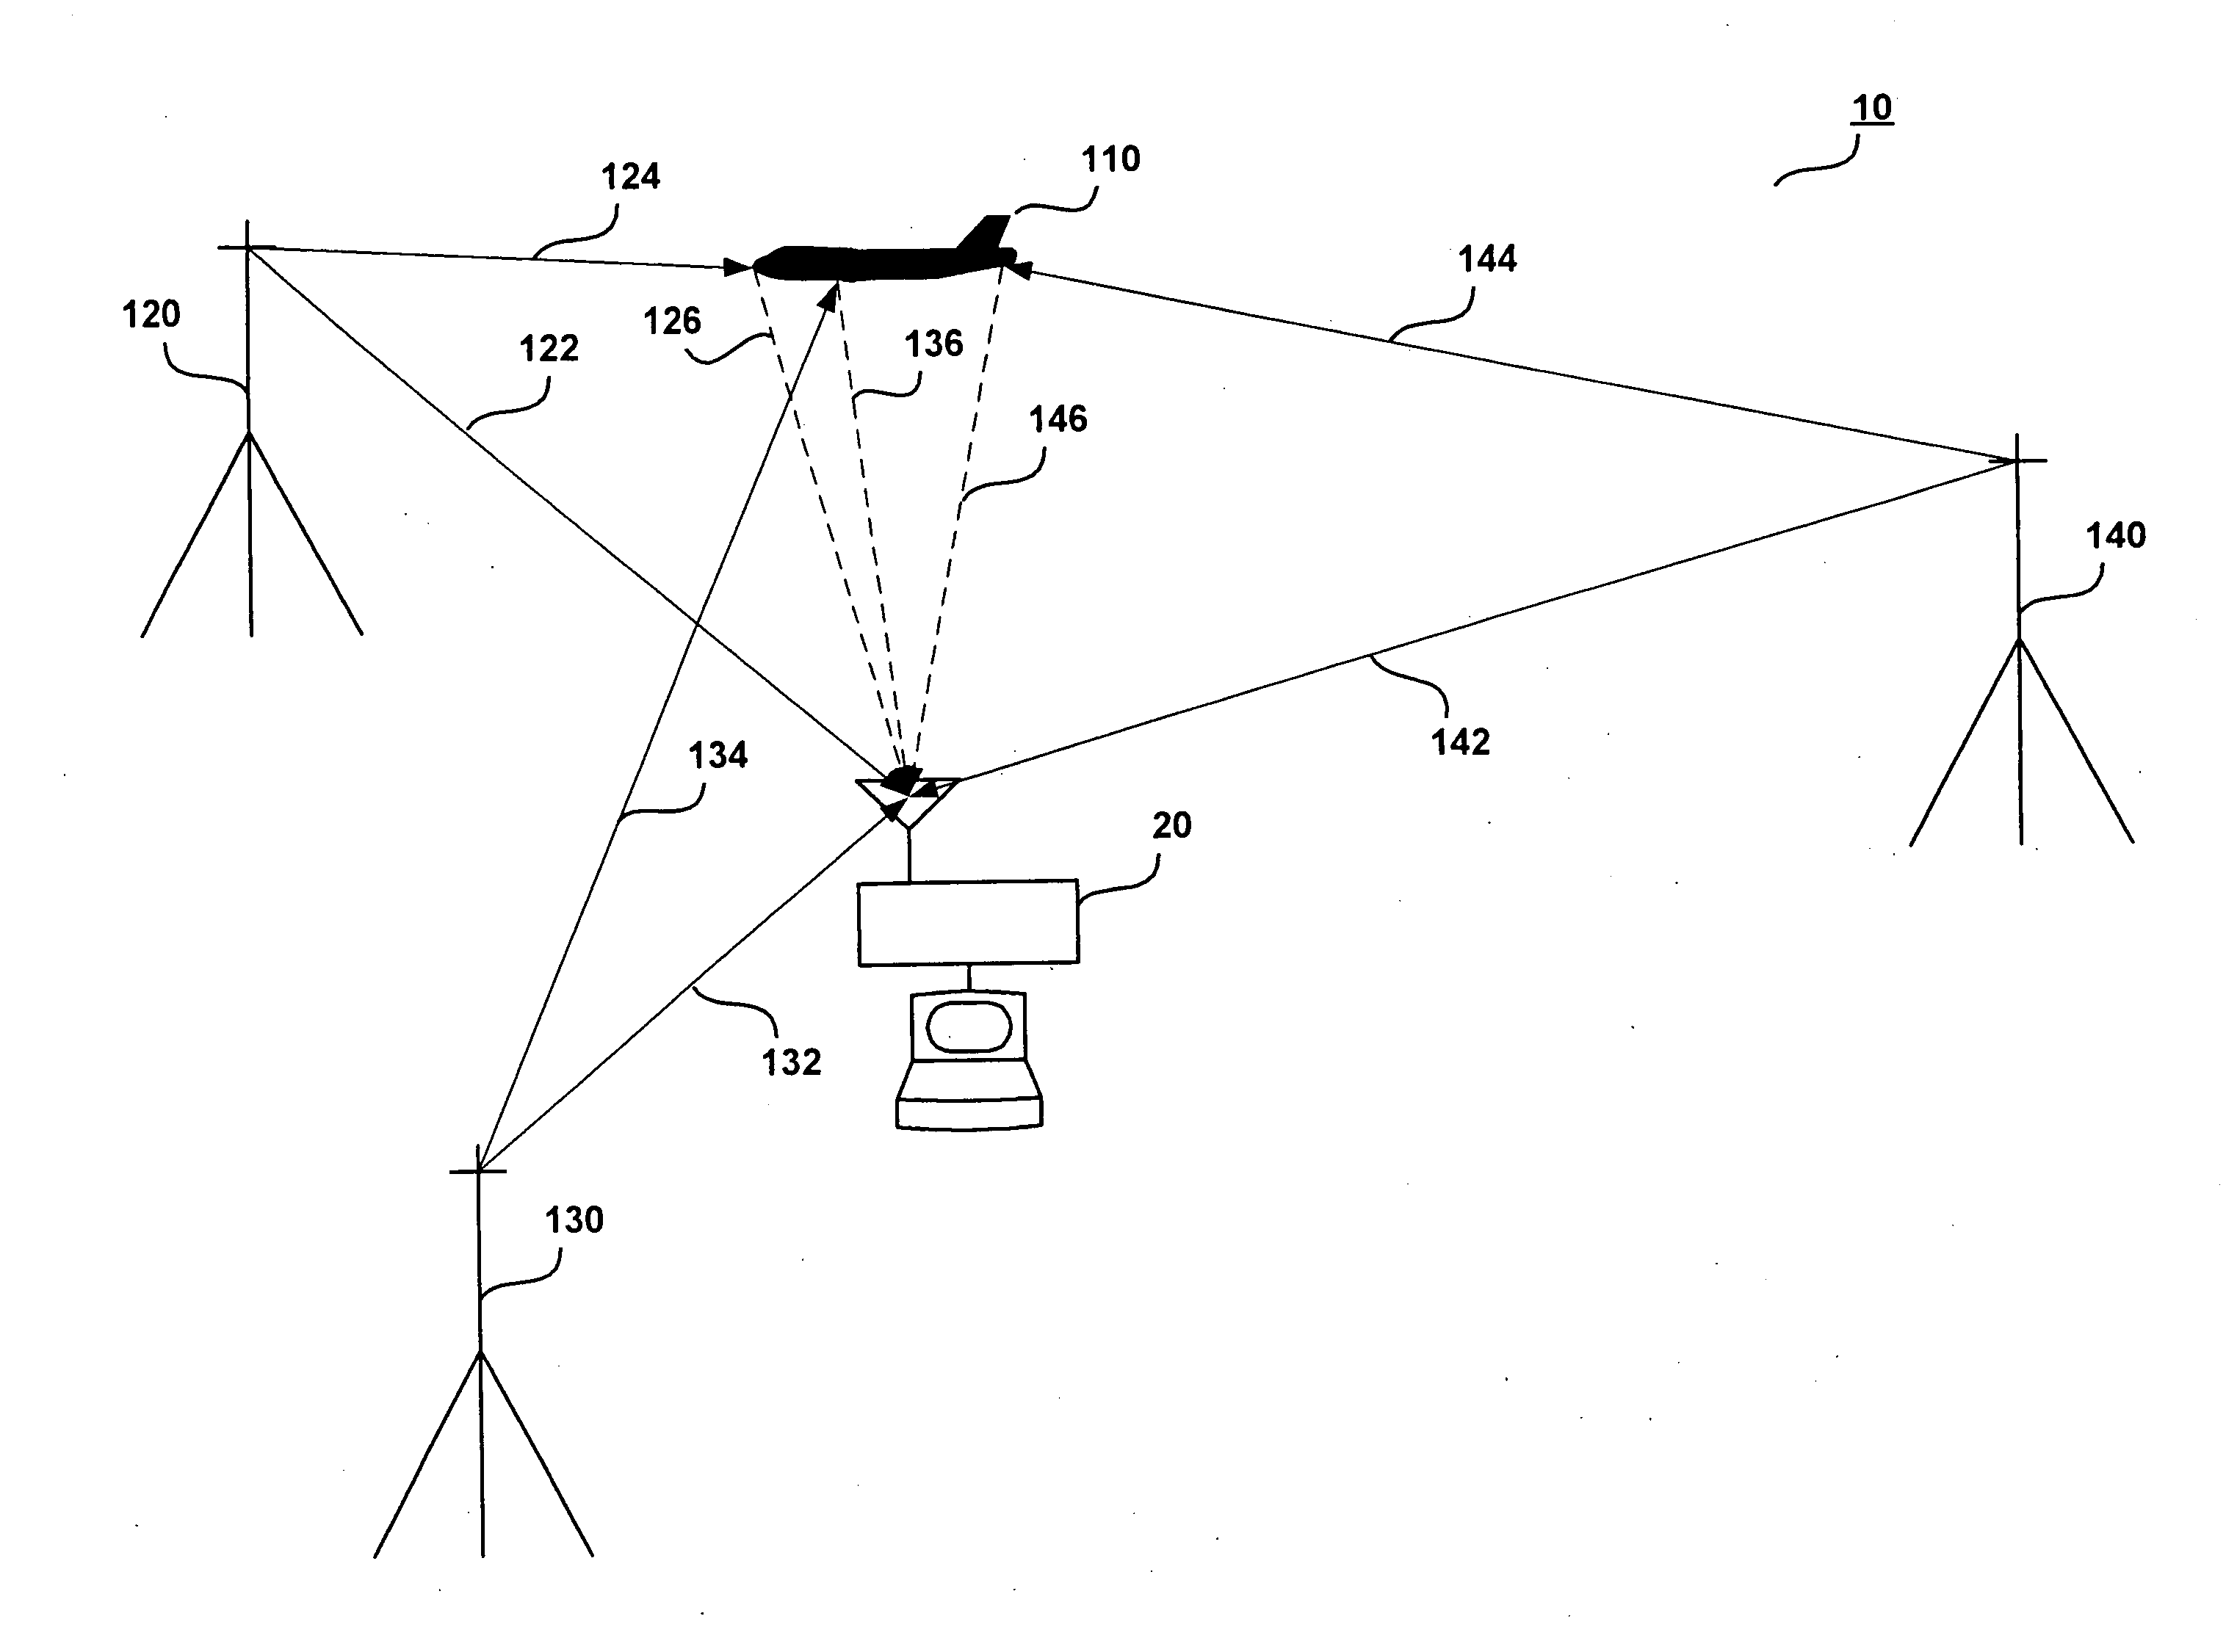 System and method for target signature calculation and recognition